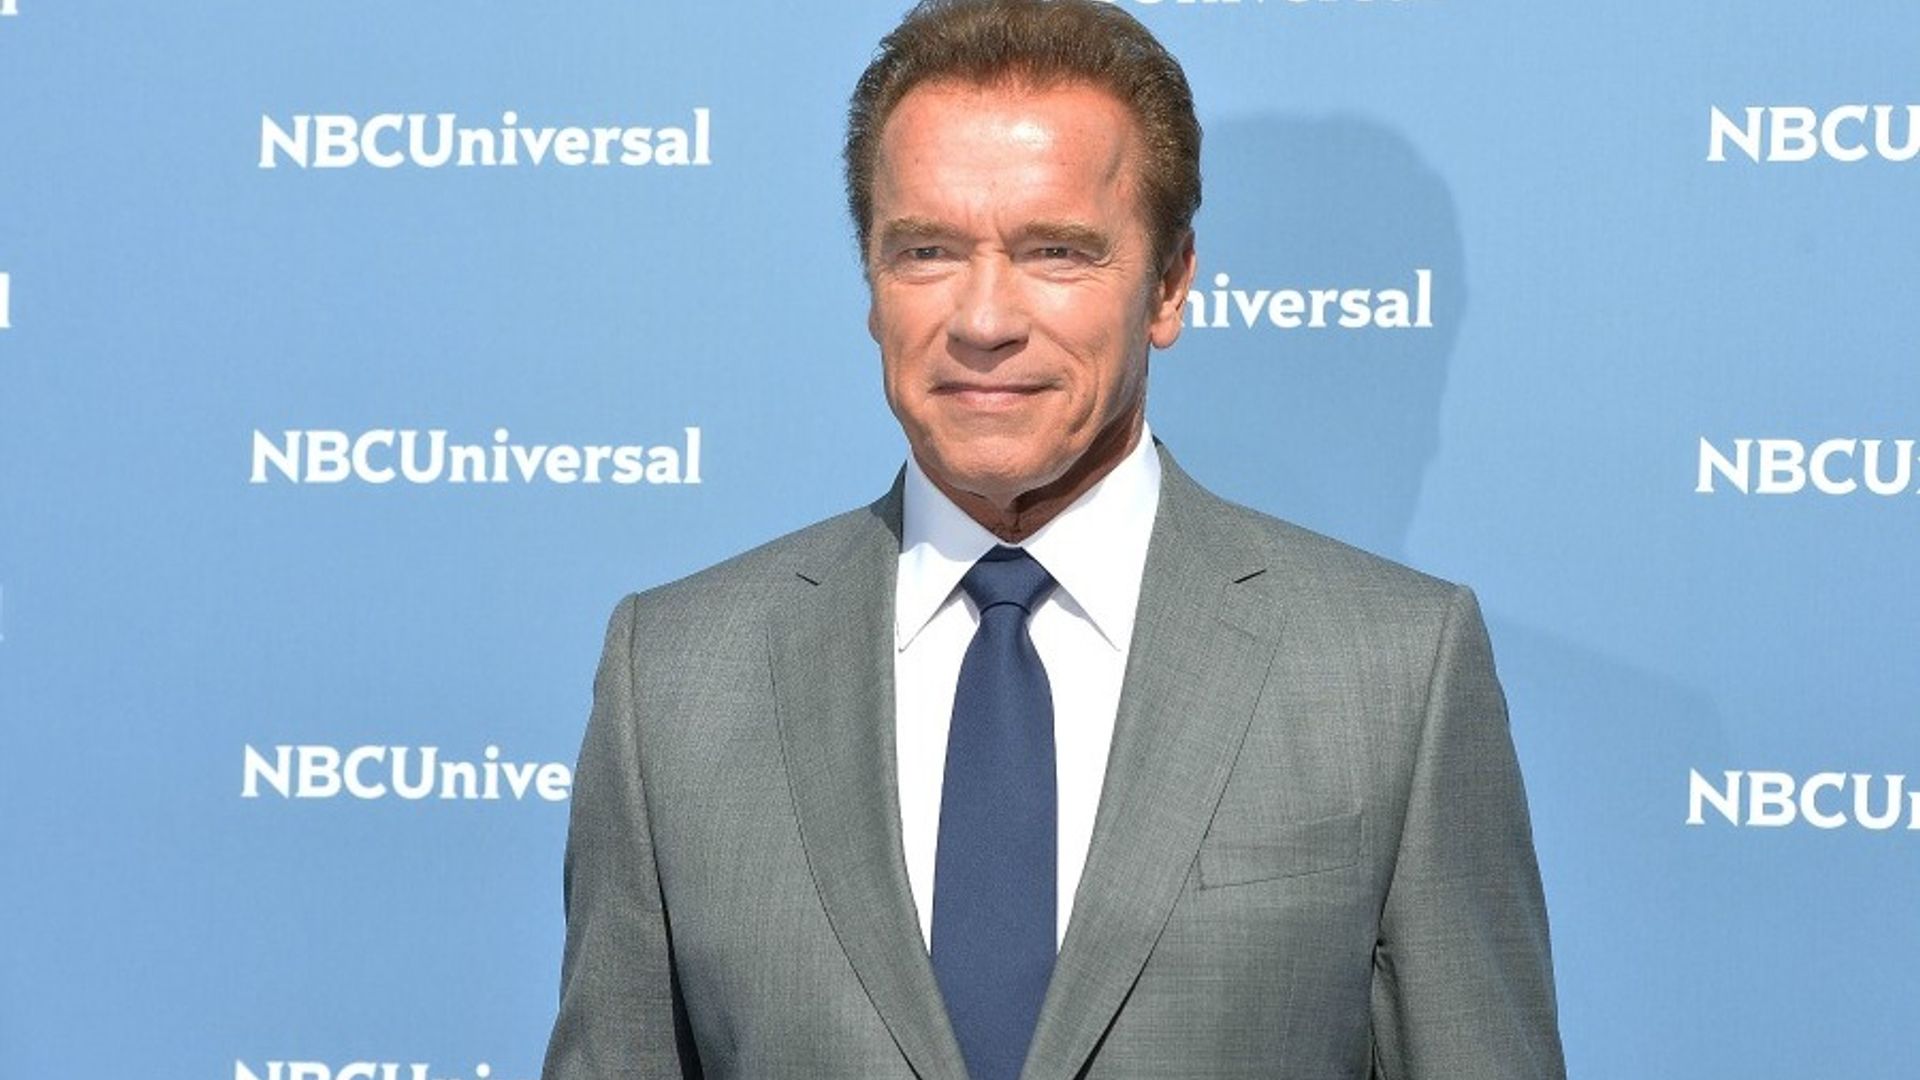 Find out what happens when Arnold Schwarzenegger comes face to face with an elephant on safari